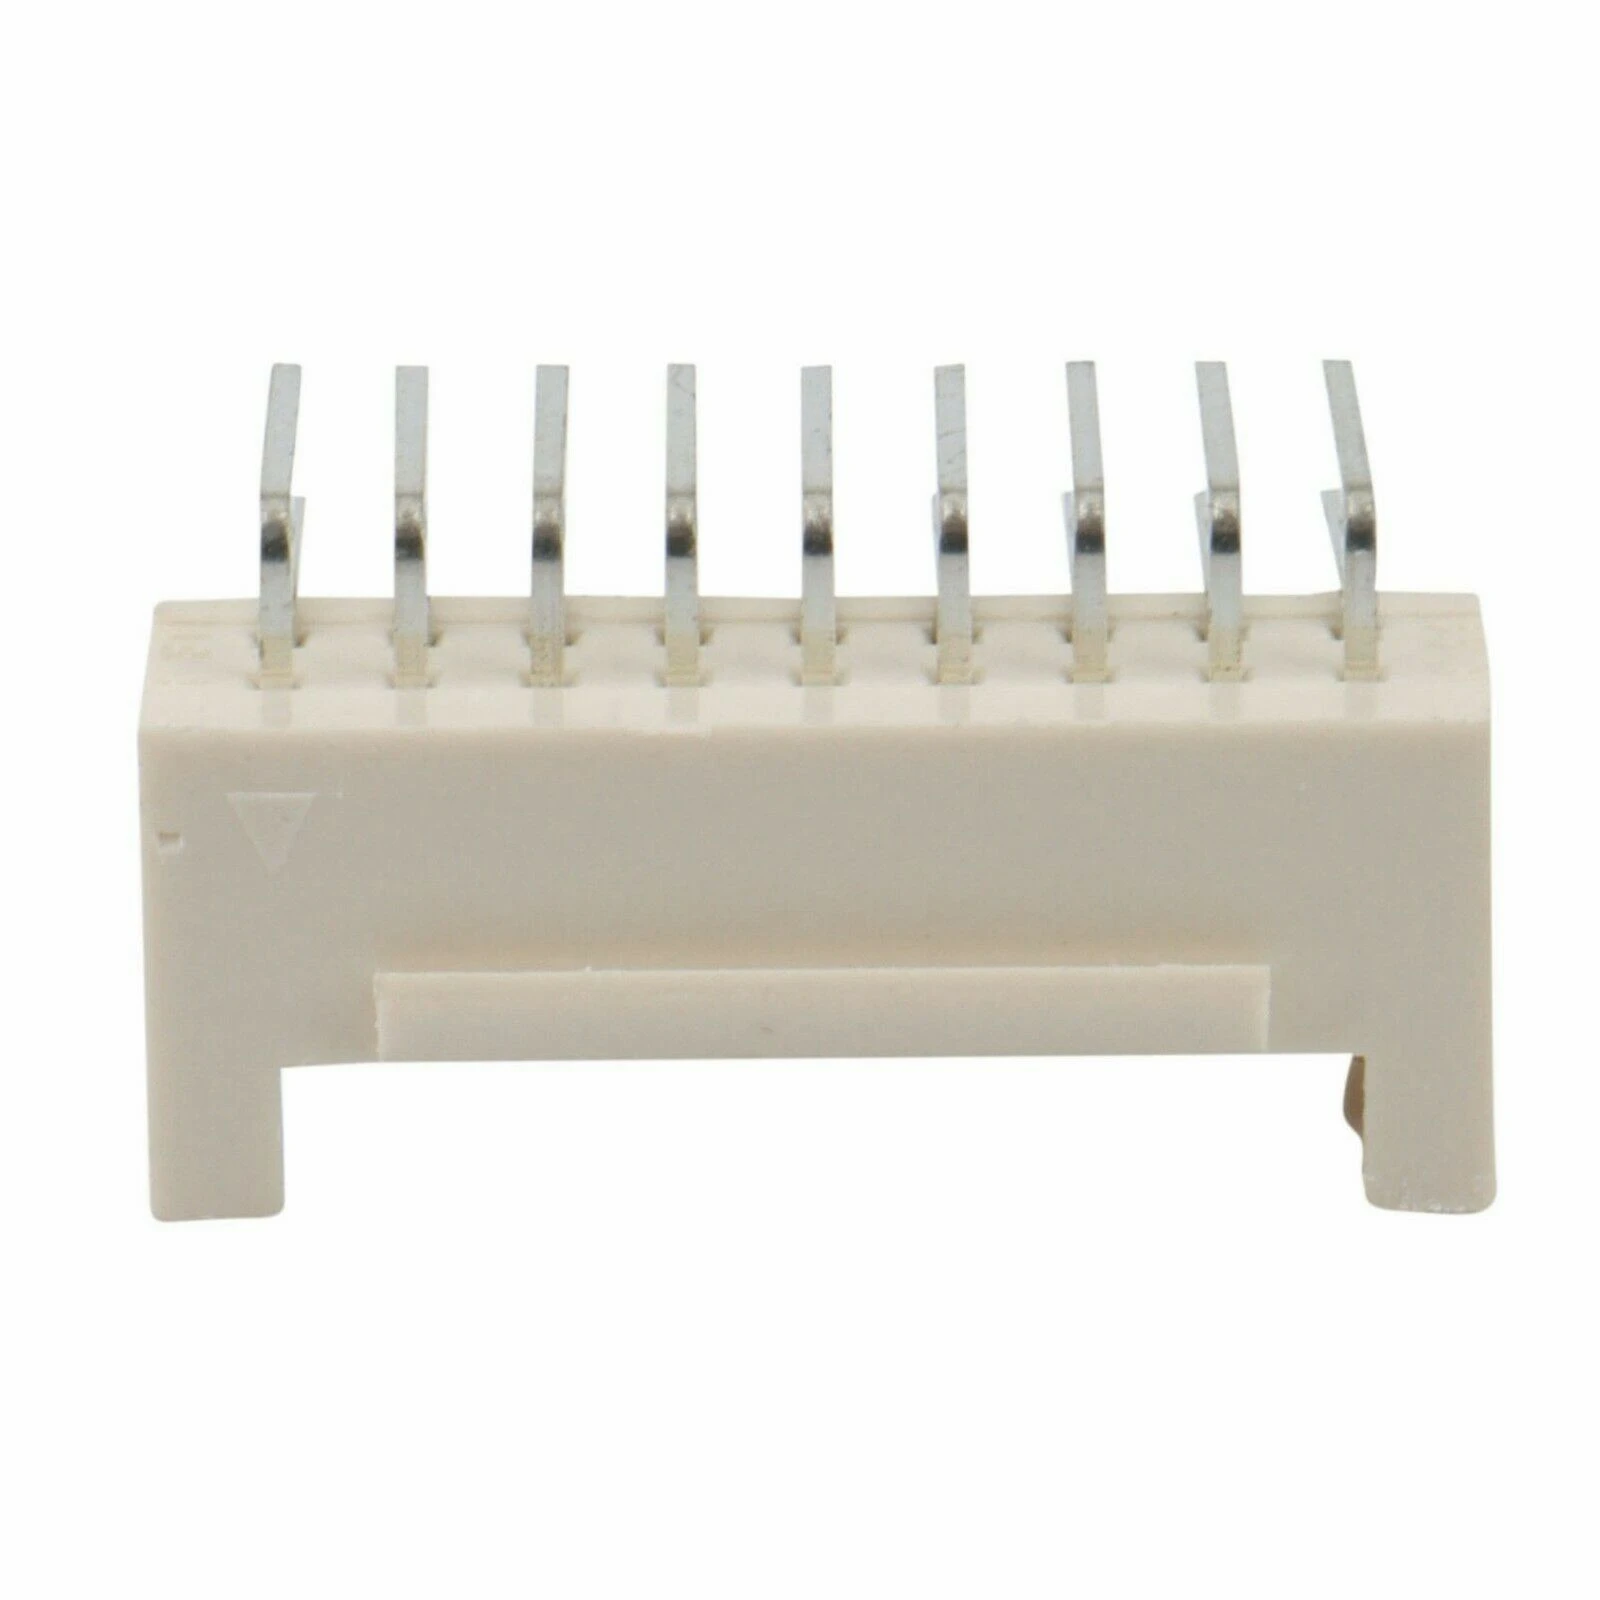 Universal 2*9 Pin Antminer Hashboard Connector 10Pcs 20 Pcs Standard Bitcoin Cash For S9 L3+ L3++ S17 White